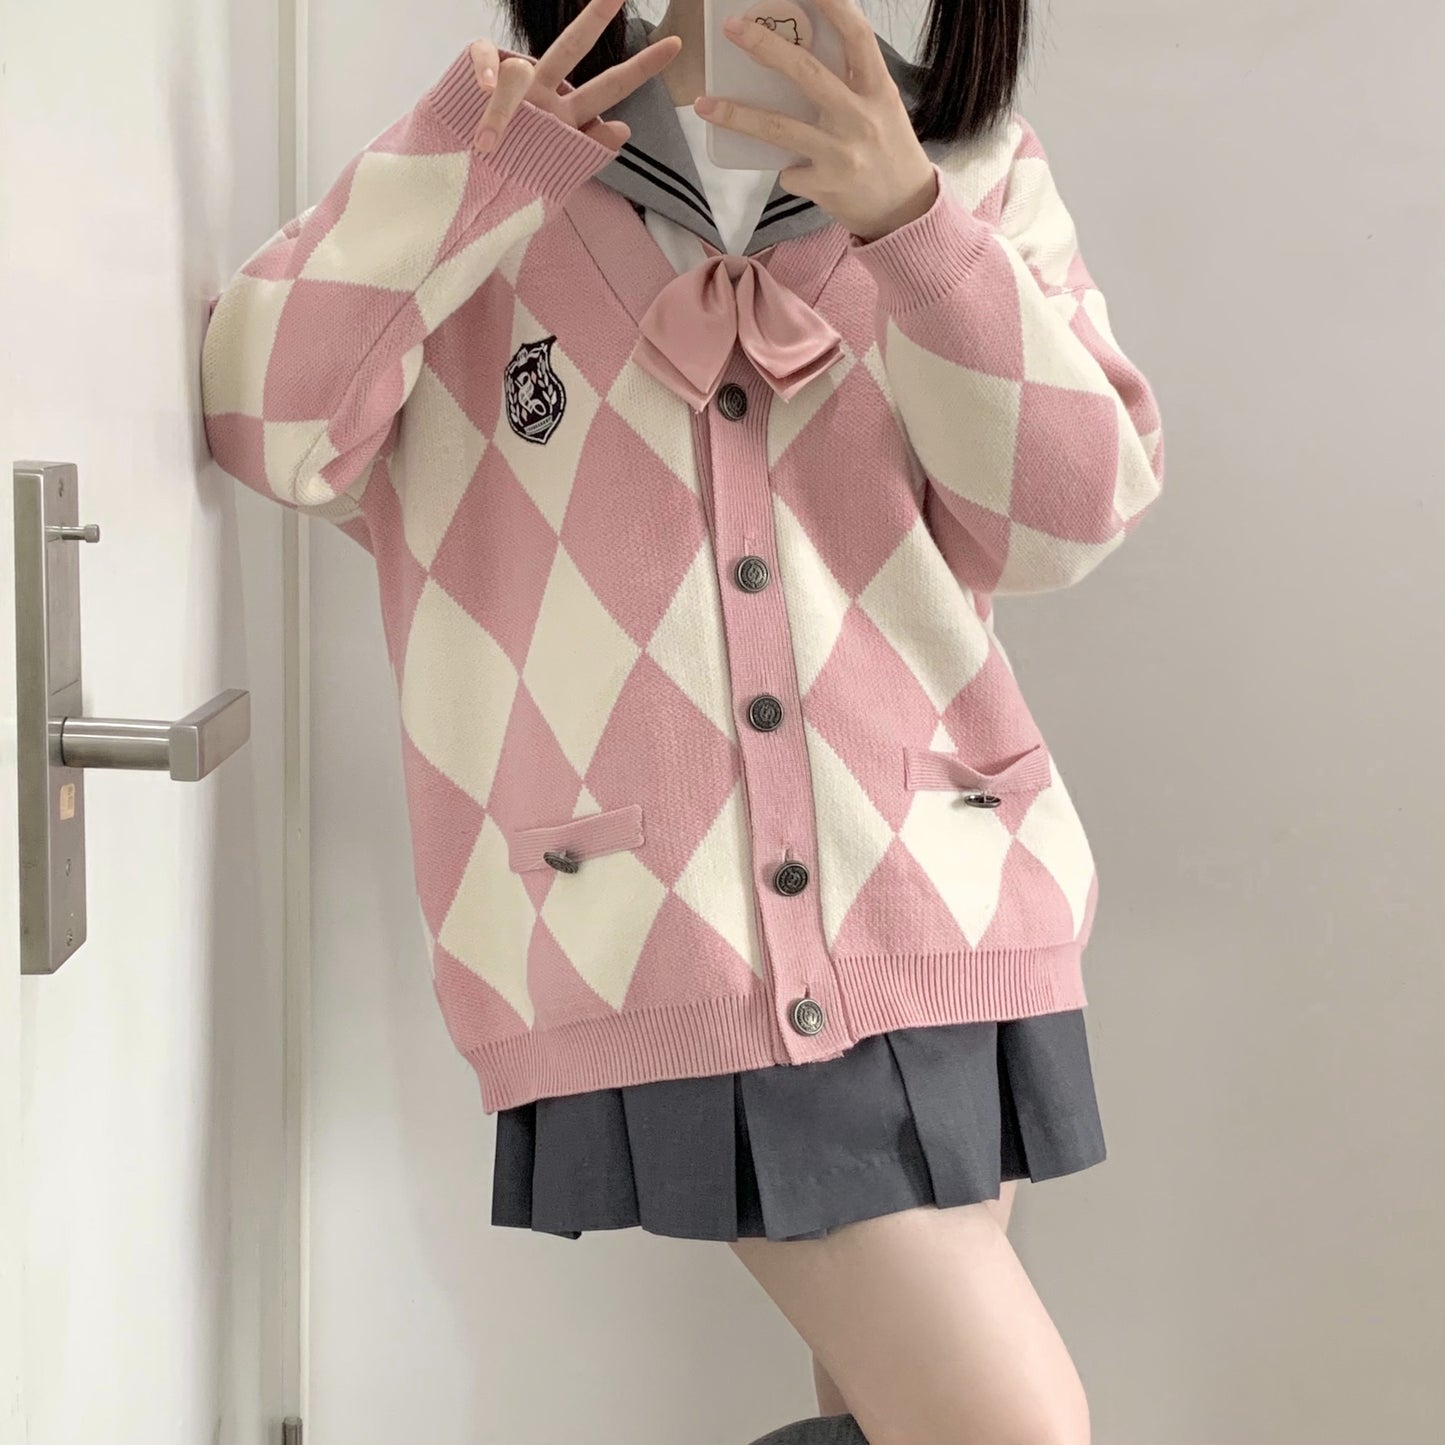 Phamtom School Argyle Black White Gray Red Pink Japanese Student Autumn Winter Cute Cozy Comfy Knitted Cardigan